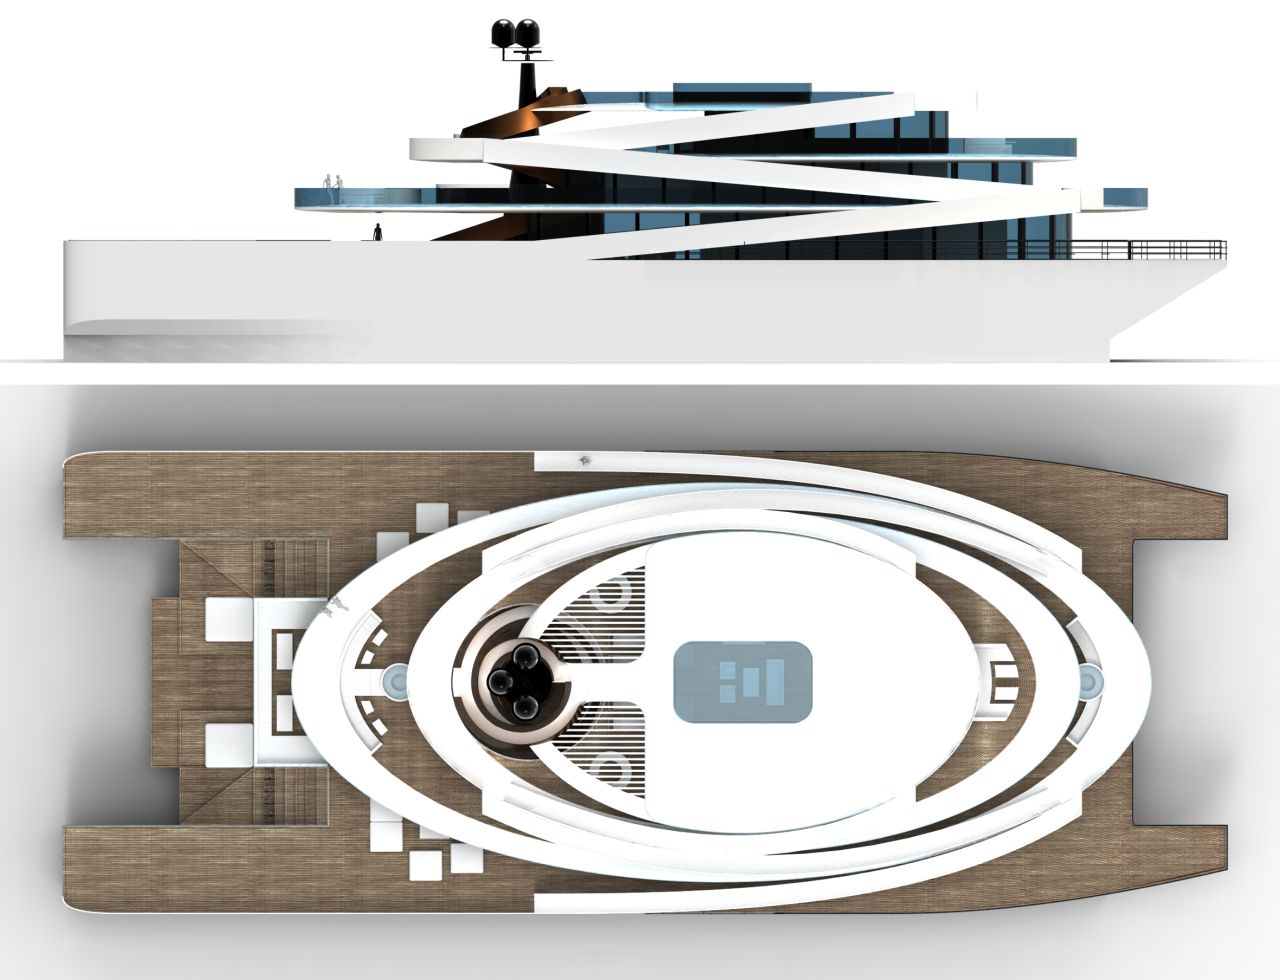 <strong>SYMPHONY, designed by Raphael Laloux</strong><br /><br />"The superyacht industry is quite conservative, with the average age of an owner 65-years-old," explained the designer who now works for <a href="http://www.philippebriand.com/" target="_blank" target="_blank">Philippe Briand Yacht Design.</a><br /><br />"But little by little it's beginning to open up, especially after the financial crisis, with the arrival of inspiring products from the worlds of automotives and architecture."<br /><br />He estimated the 60-meter superyacht would cost €50 million ($62 million).